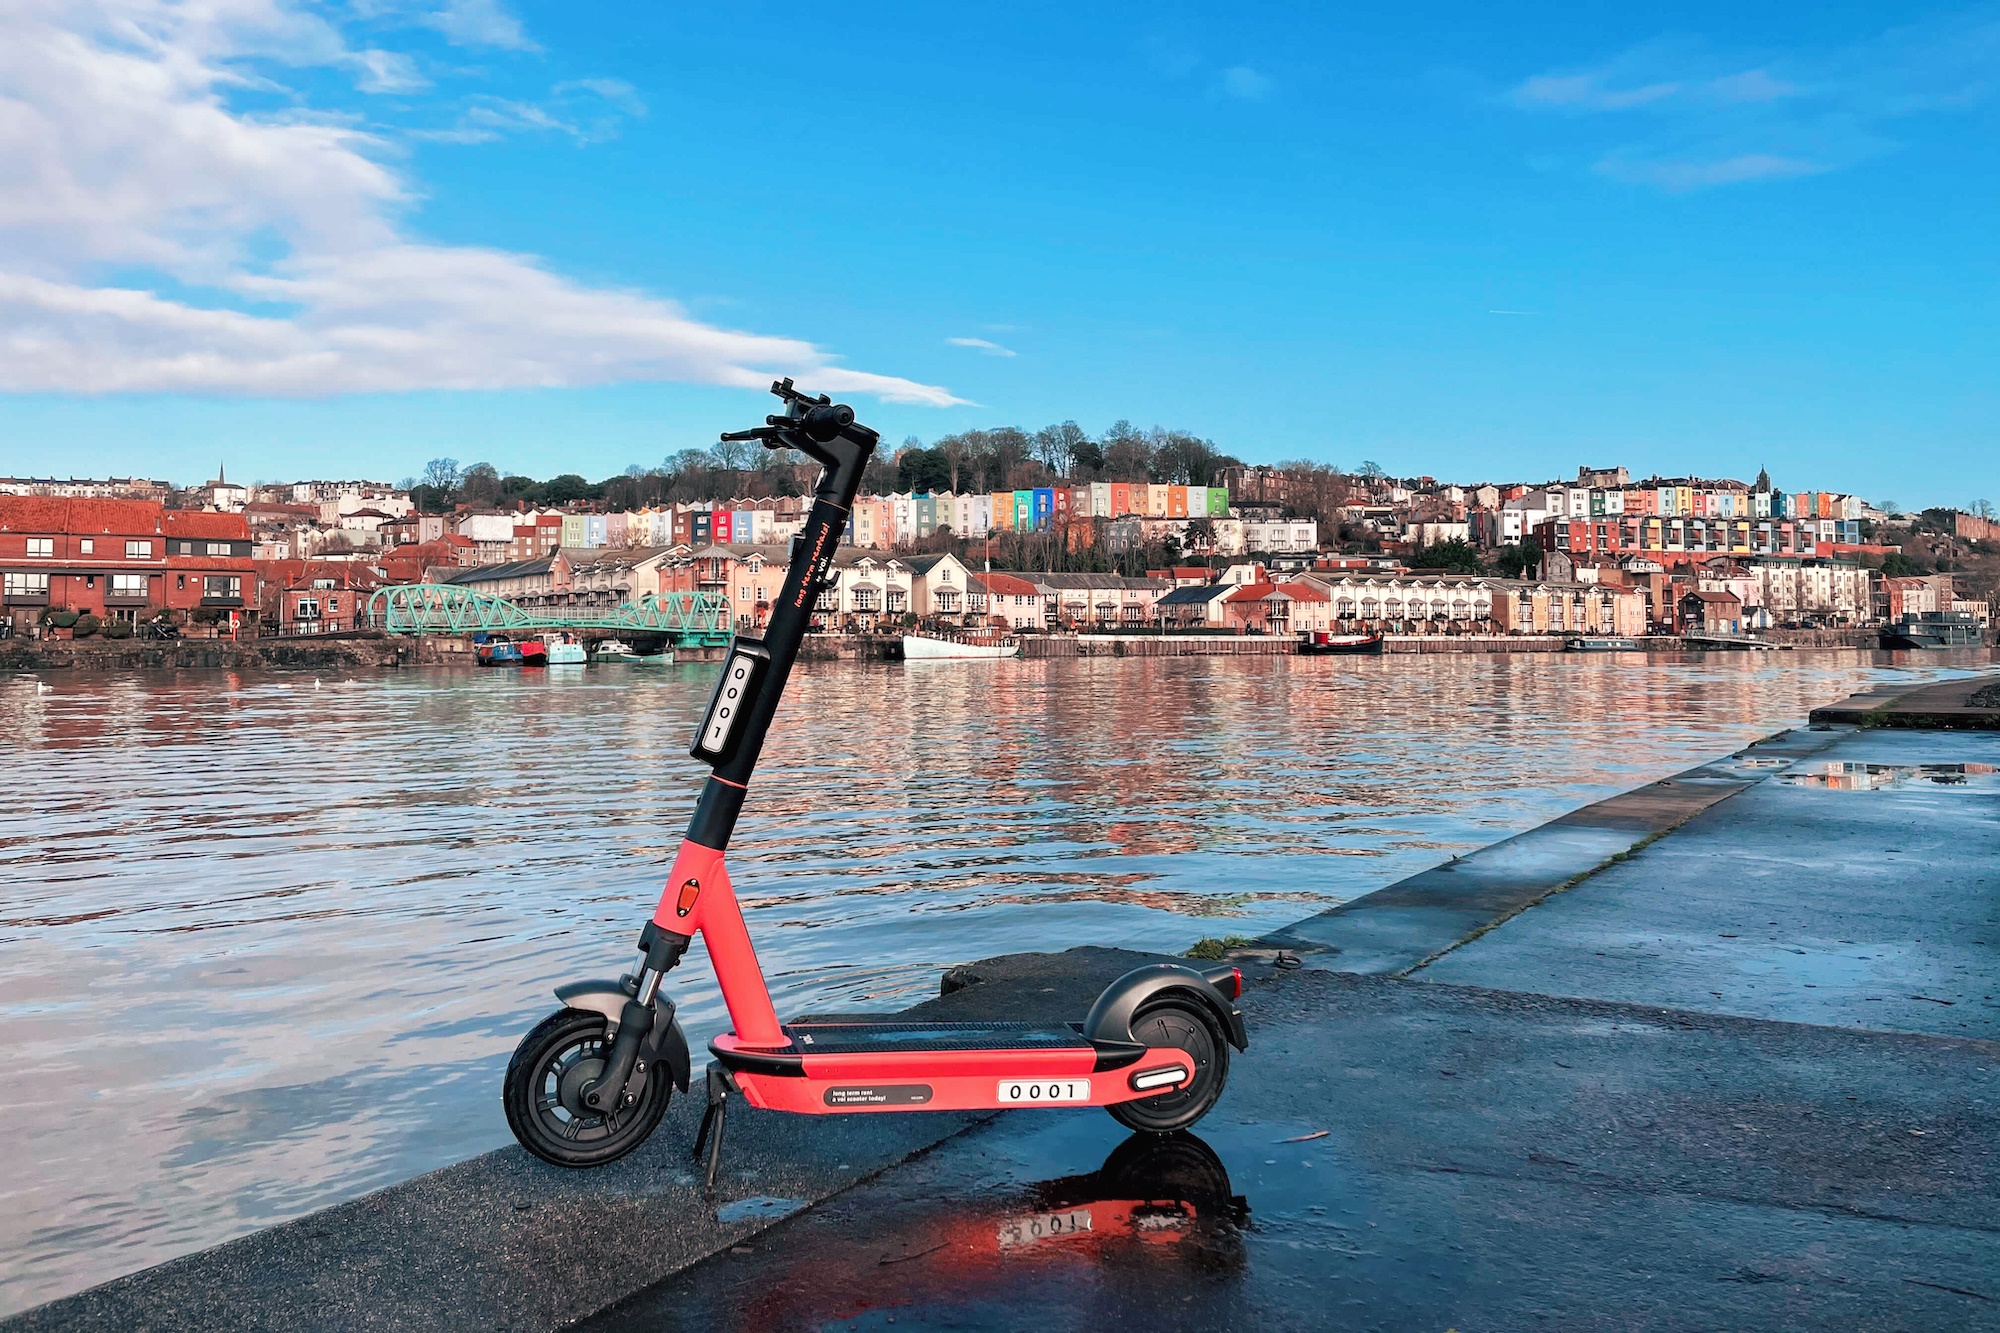 Gutter Algebraisk Lydighed Voi trialling long-term e-scooter rental option | electric bike reviews,  buying advice and news - ebiketips